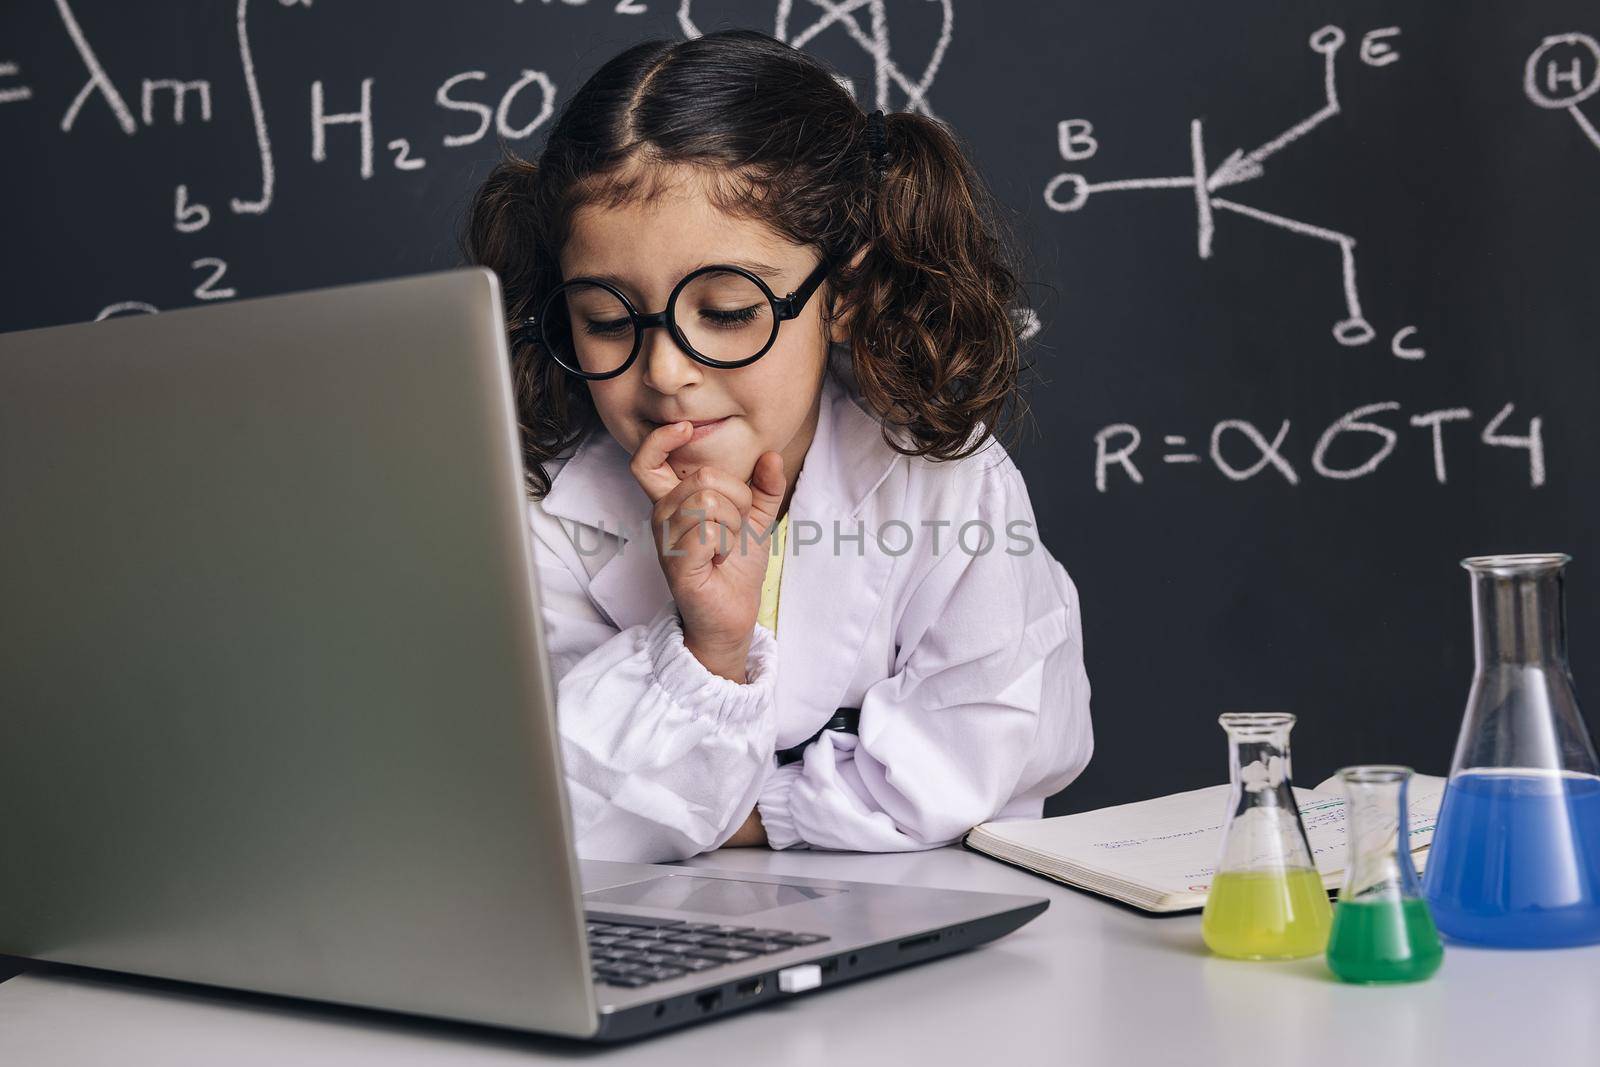 little scientist girl with glasses in lab coat looking to the computer, on school blackboard background with science formulas, back to school and successful female career concept